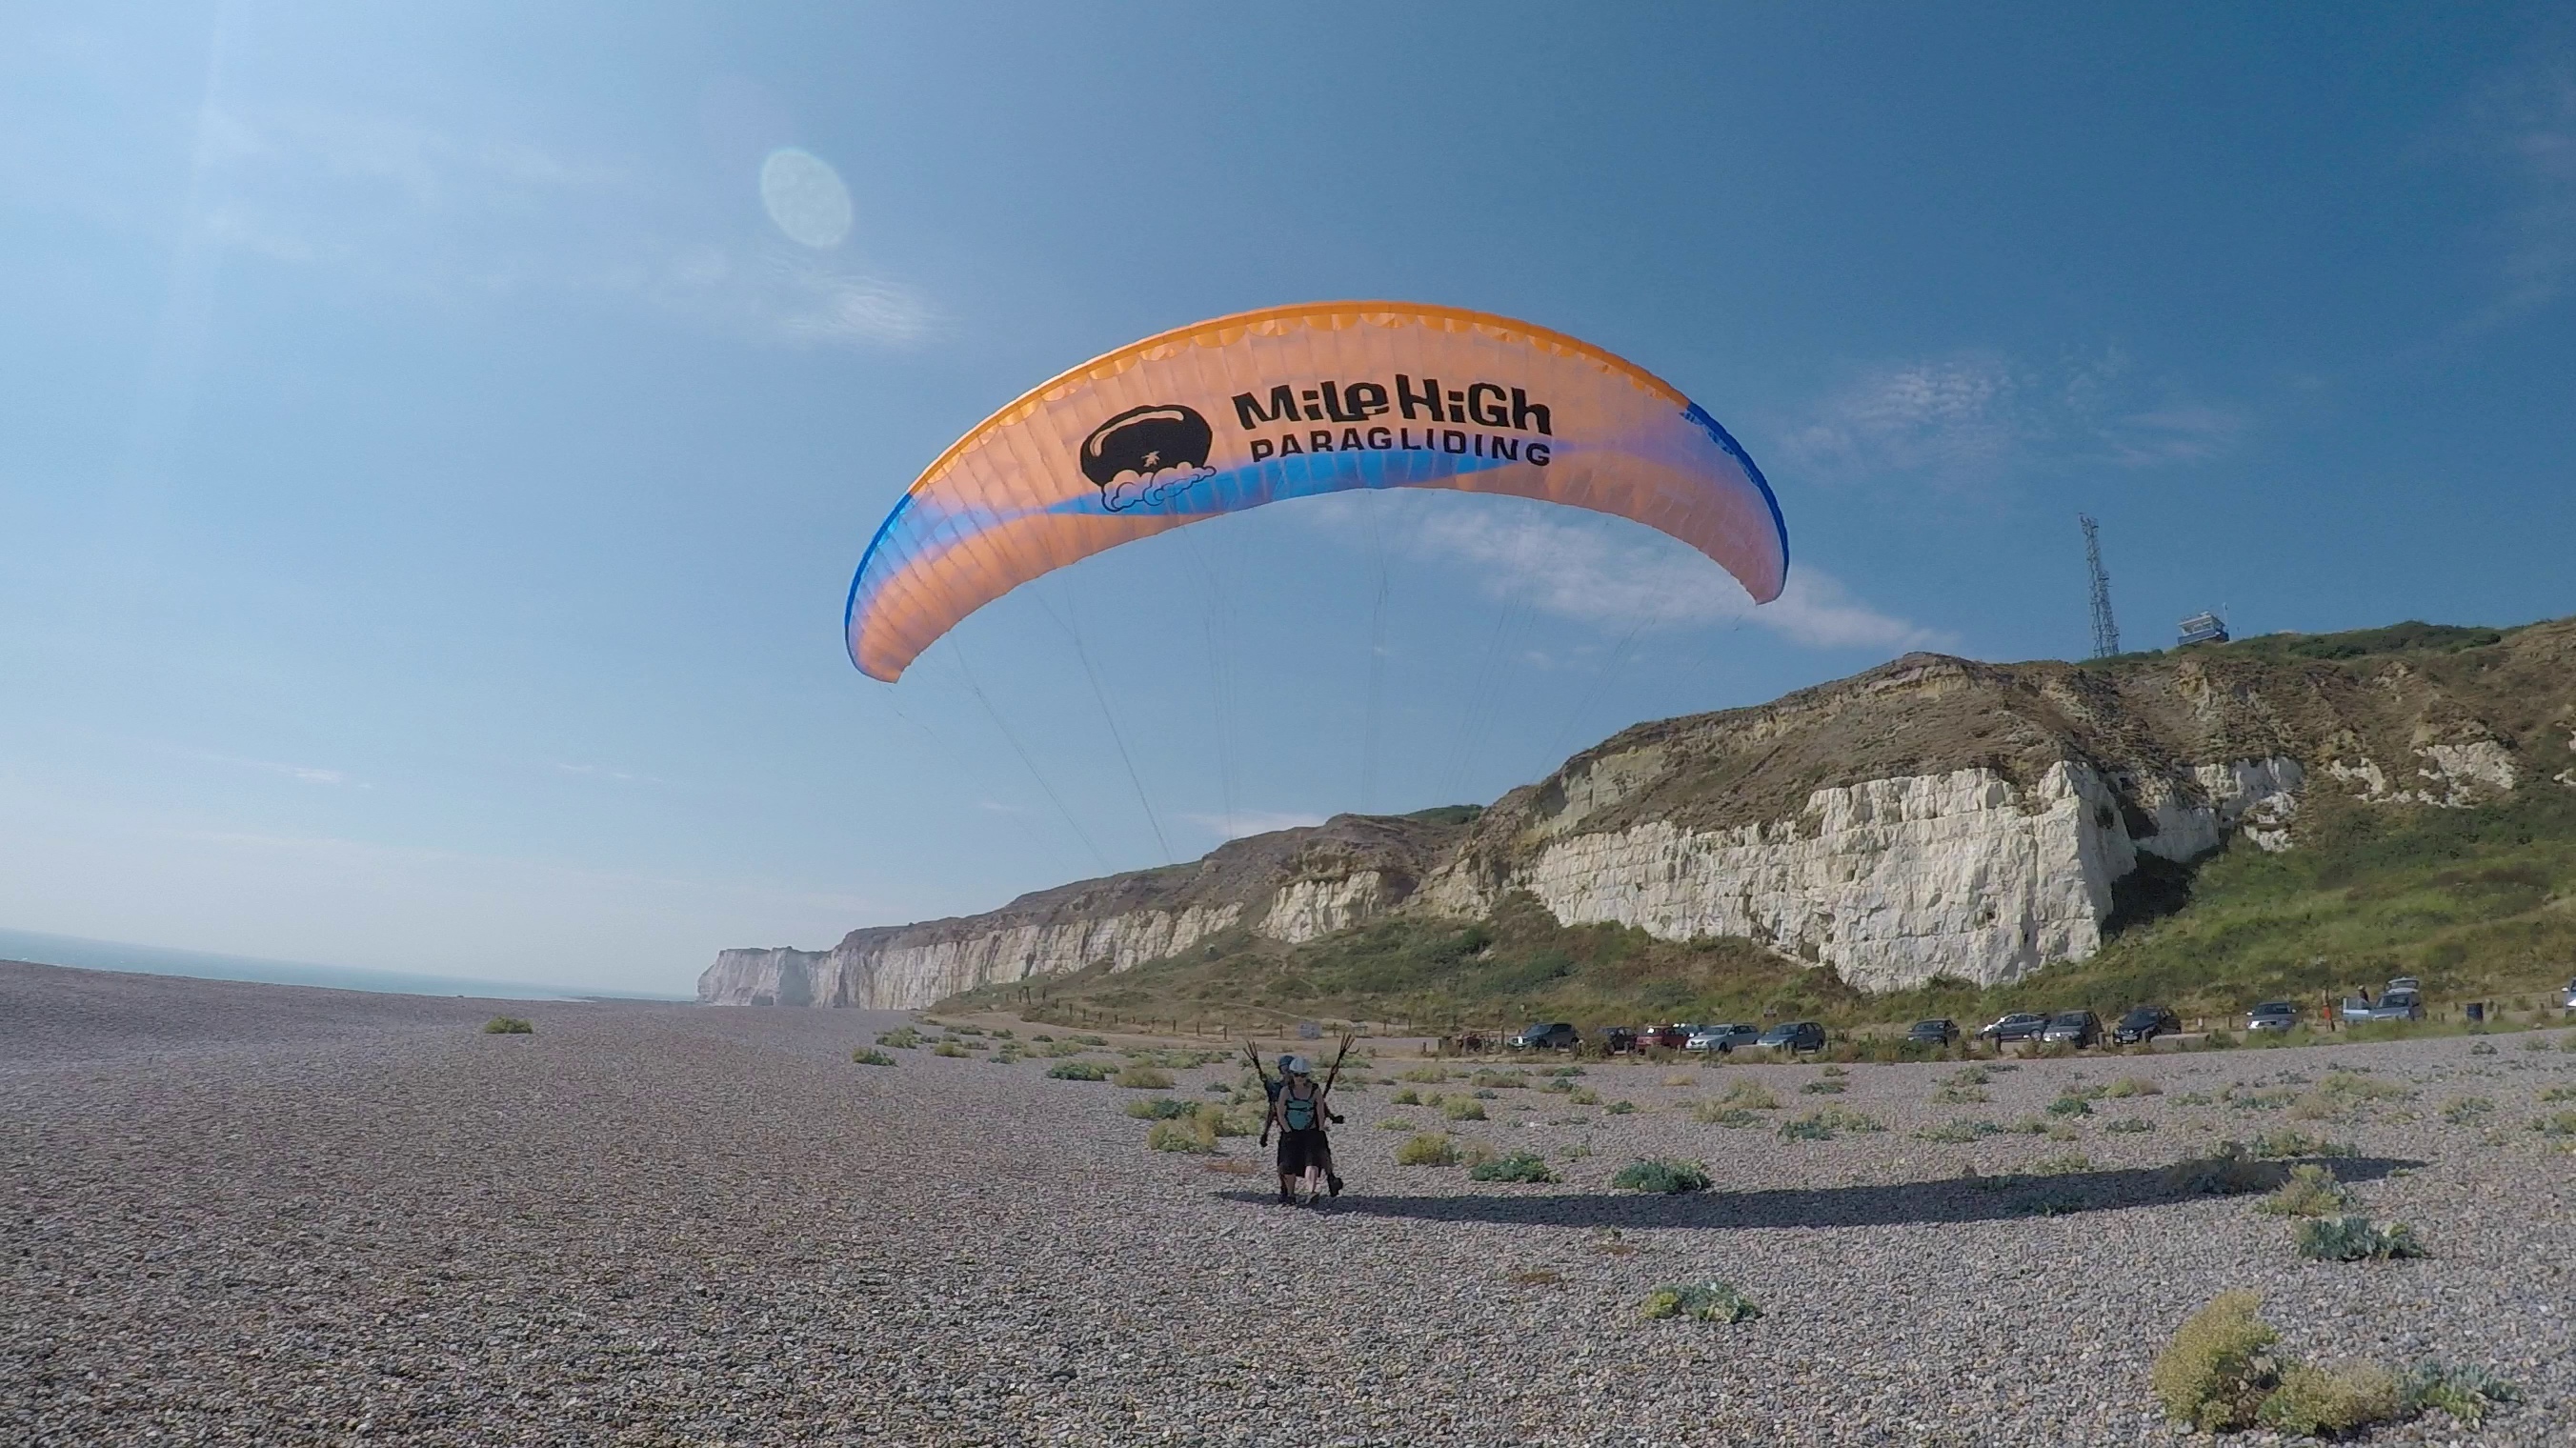 Landing at Newhaven after a tandem paragliding experience with Mile High Paragliding